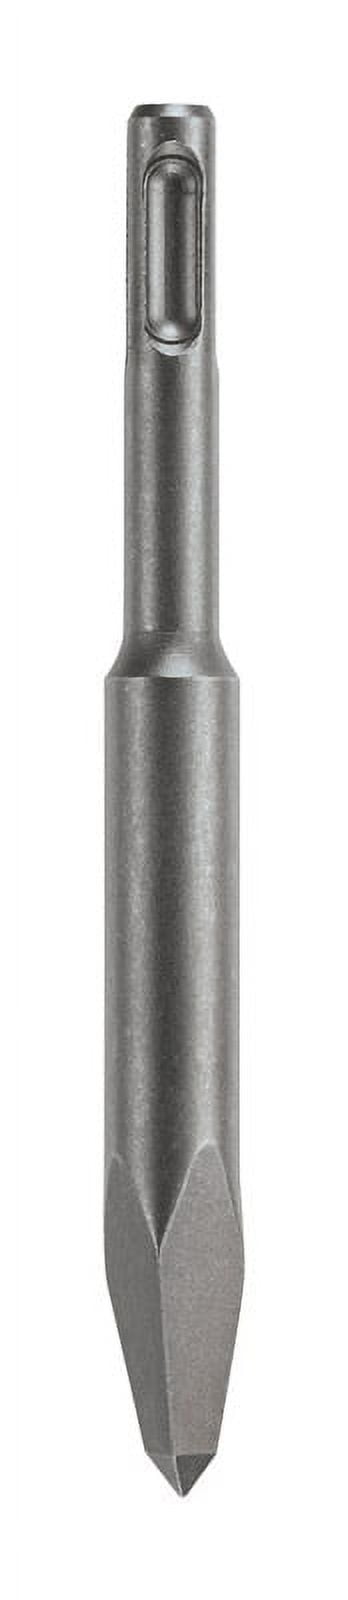 Bosch 2307676 Stubby Pointed Chisel